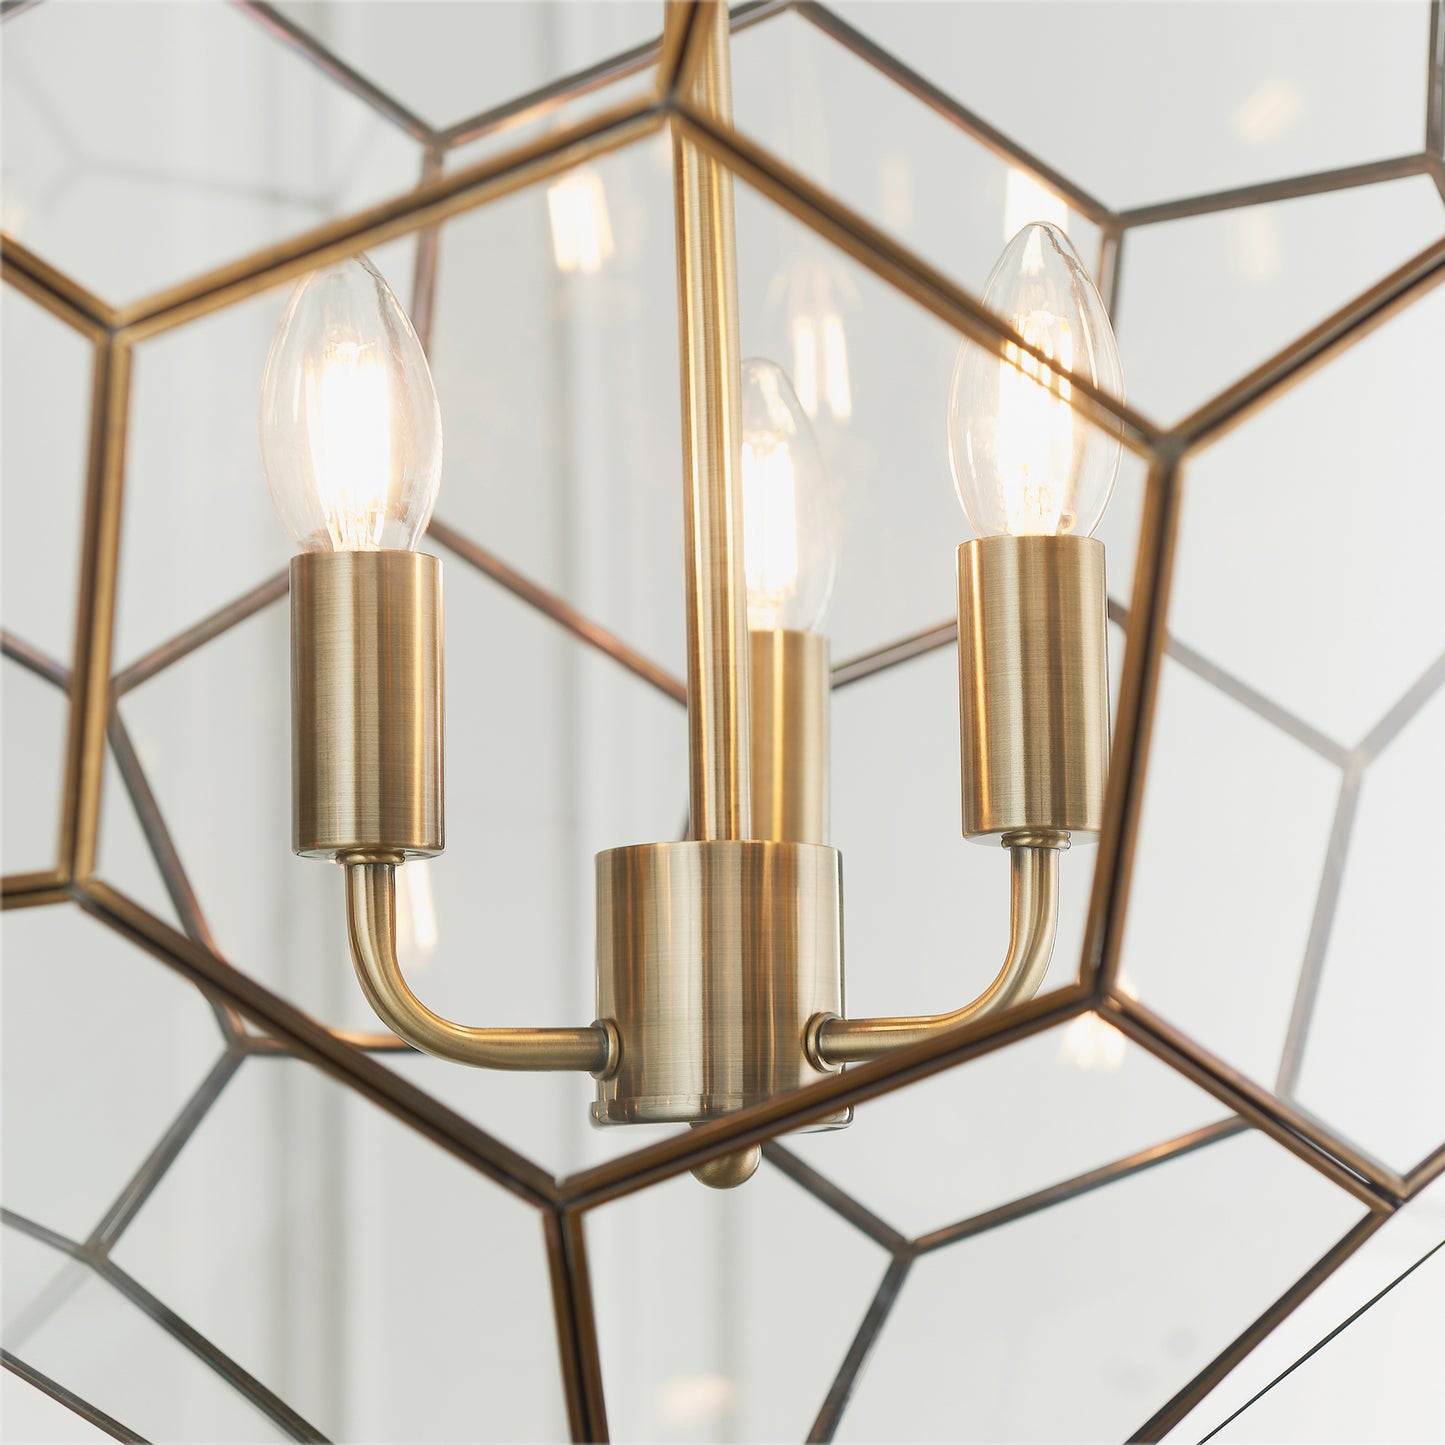 A Miele 3 Pendant Light Antique Brass with a geometric shape perfect for interior decor.